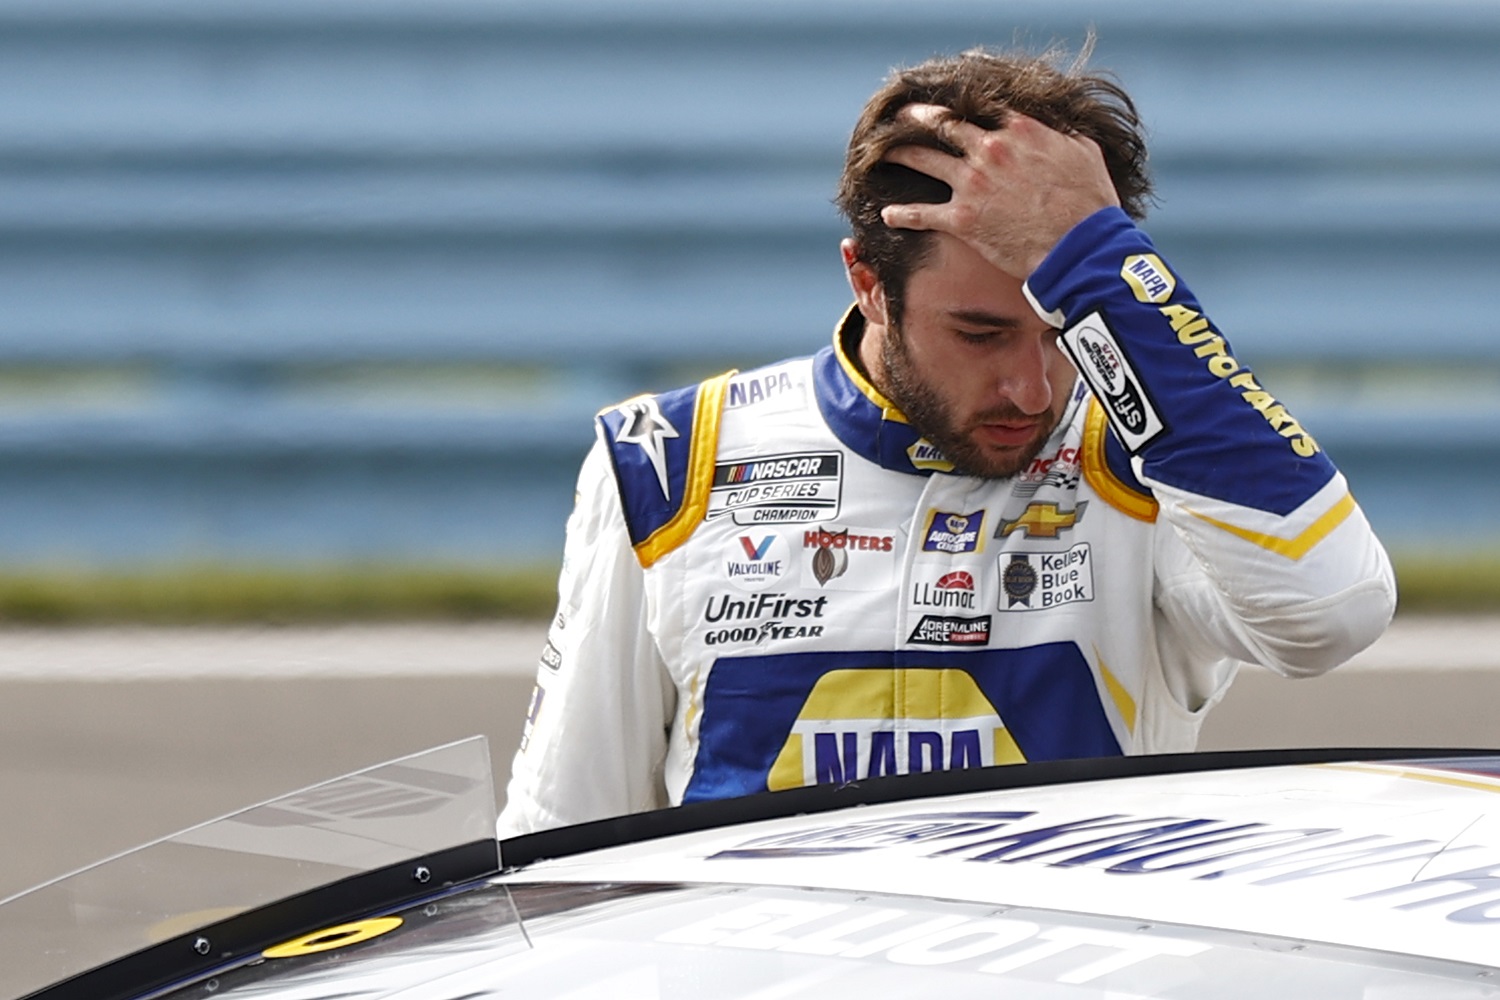 Chase Elliott exits the Hendrick Motorsports No. 9 Chevy after a second-place showing at the NASCAR Cup Series race at Watkins Glen International on Aug. 8, 2021. | Jared C. Tilton/Getty Images